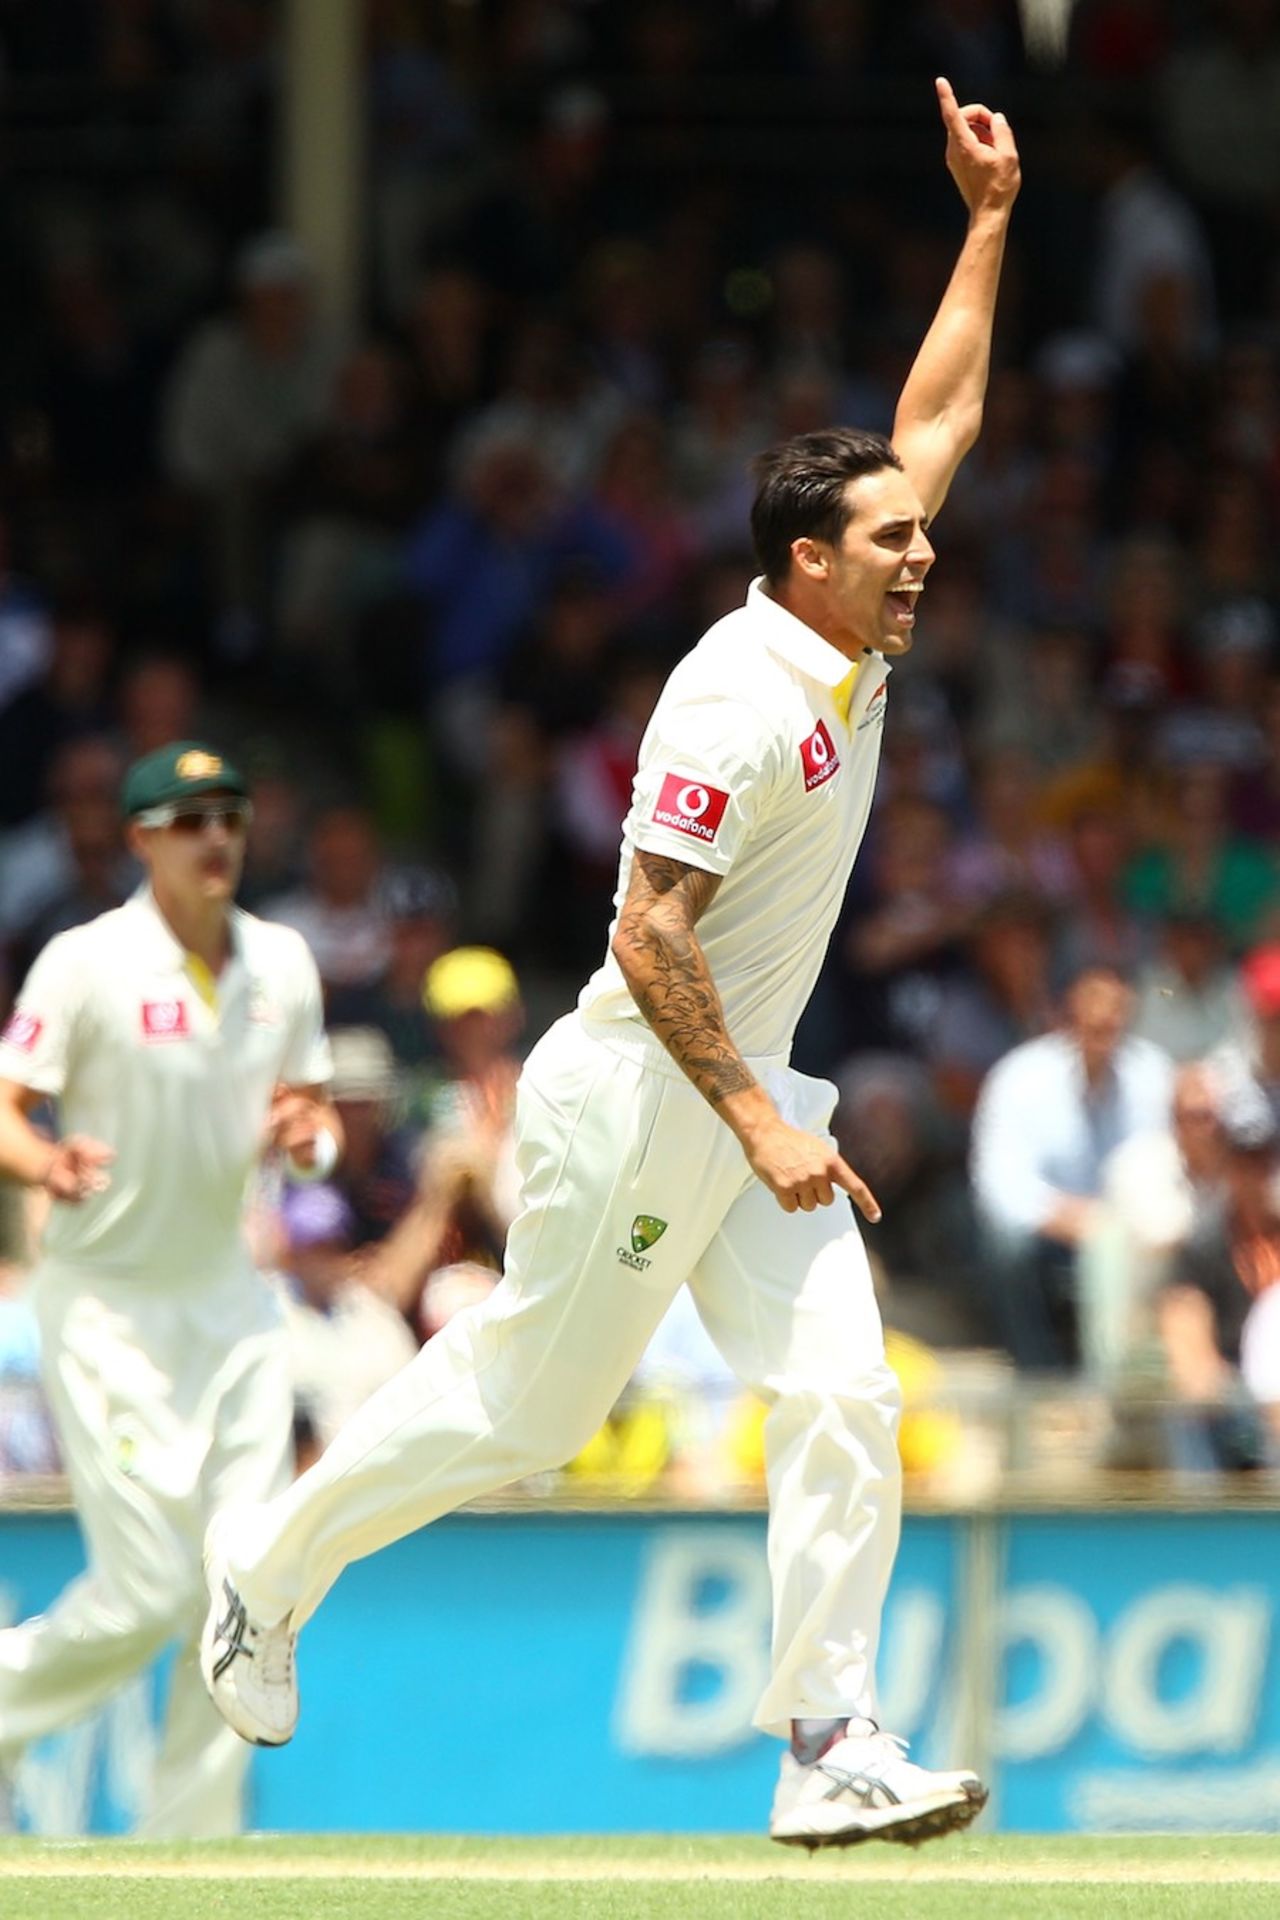 Mitchell Johnson celebrates a wicket on his return to the Test side, Australia v South Africa, 3rd Test, Perth, 1st day, November 30, 2012